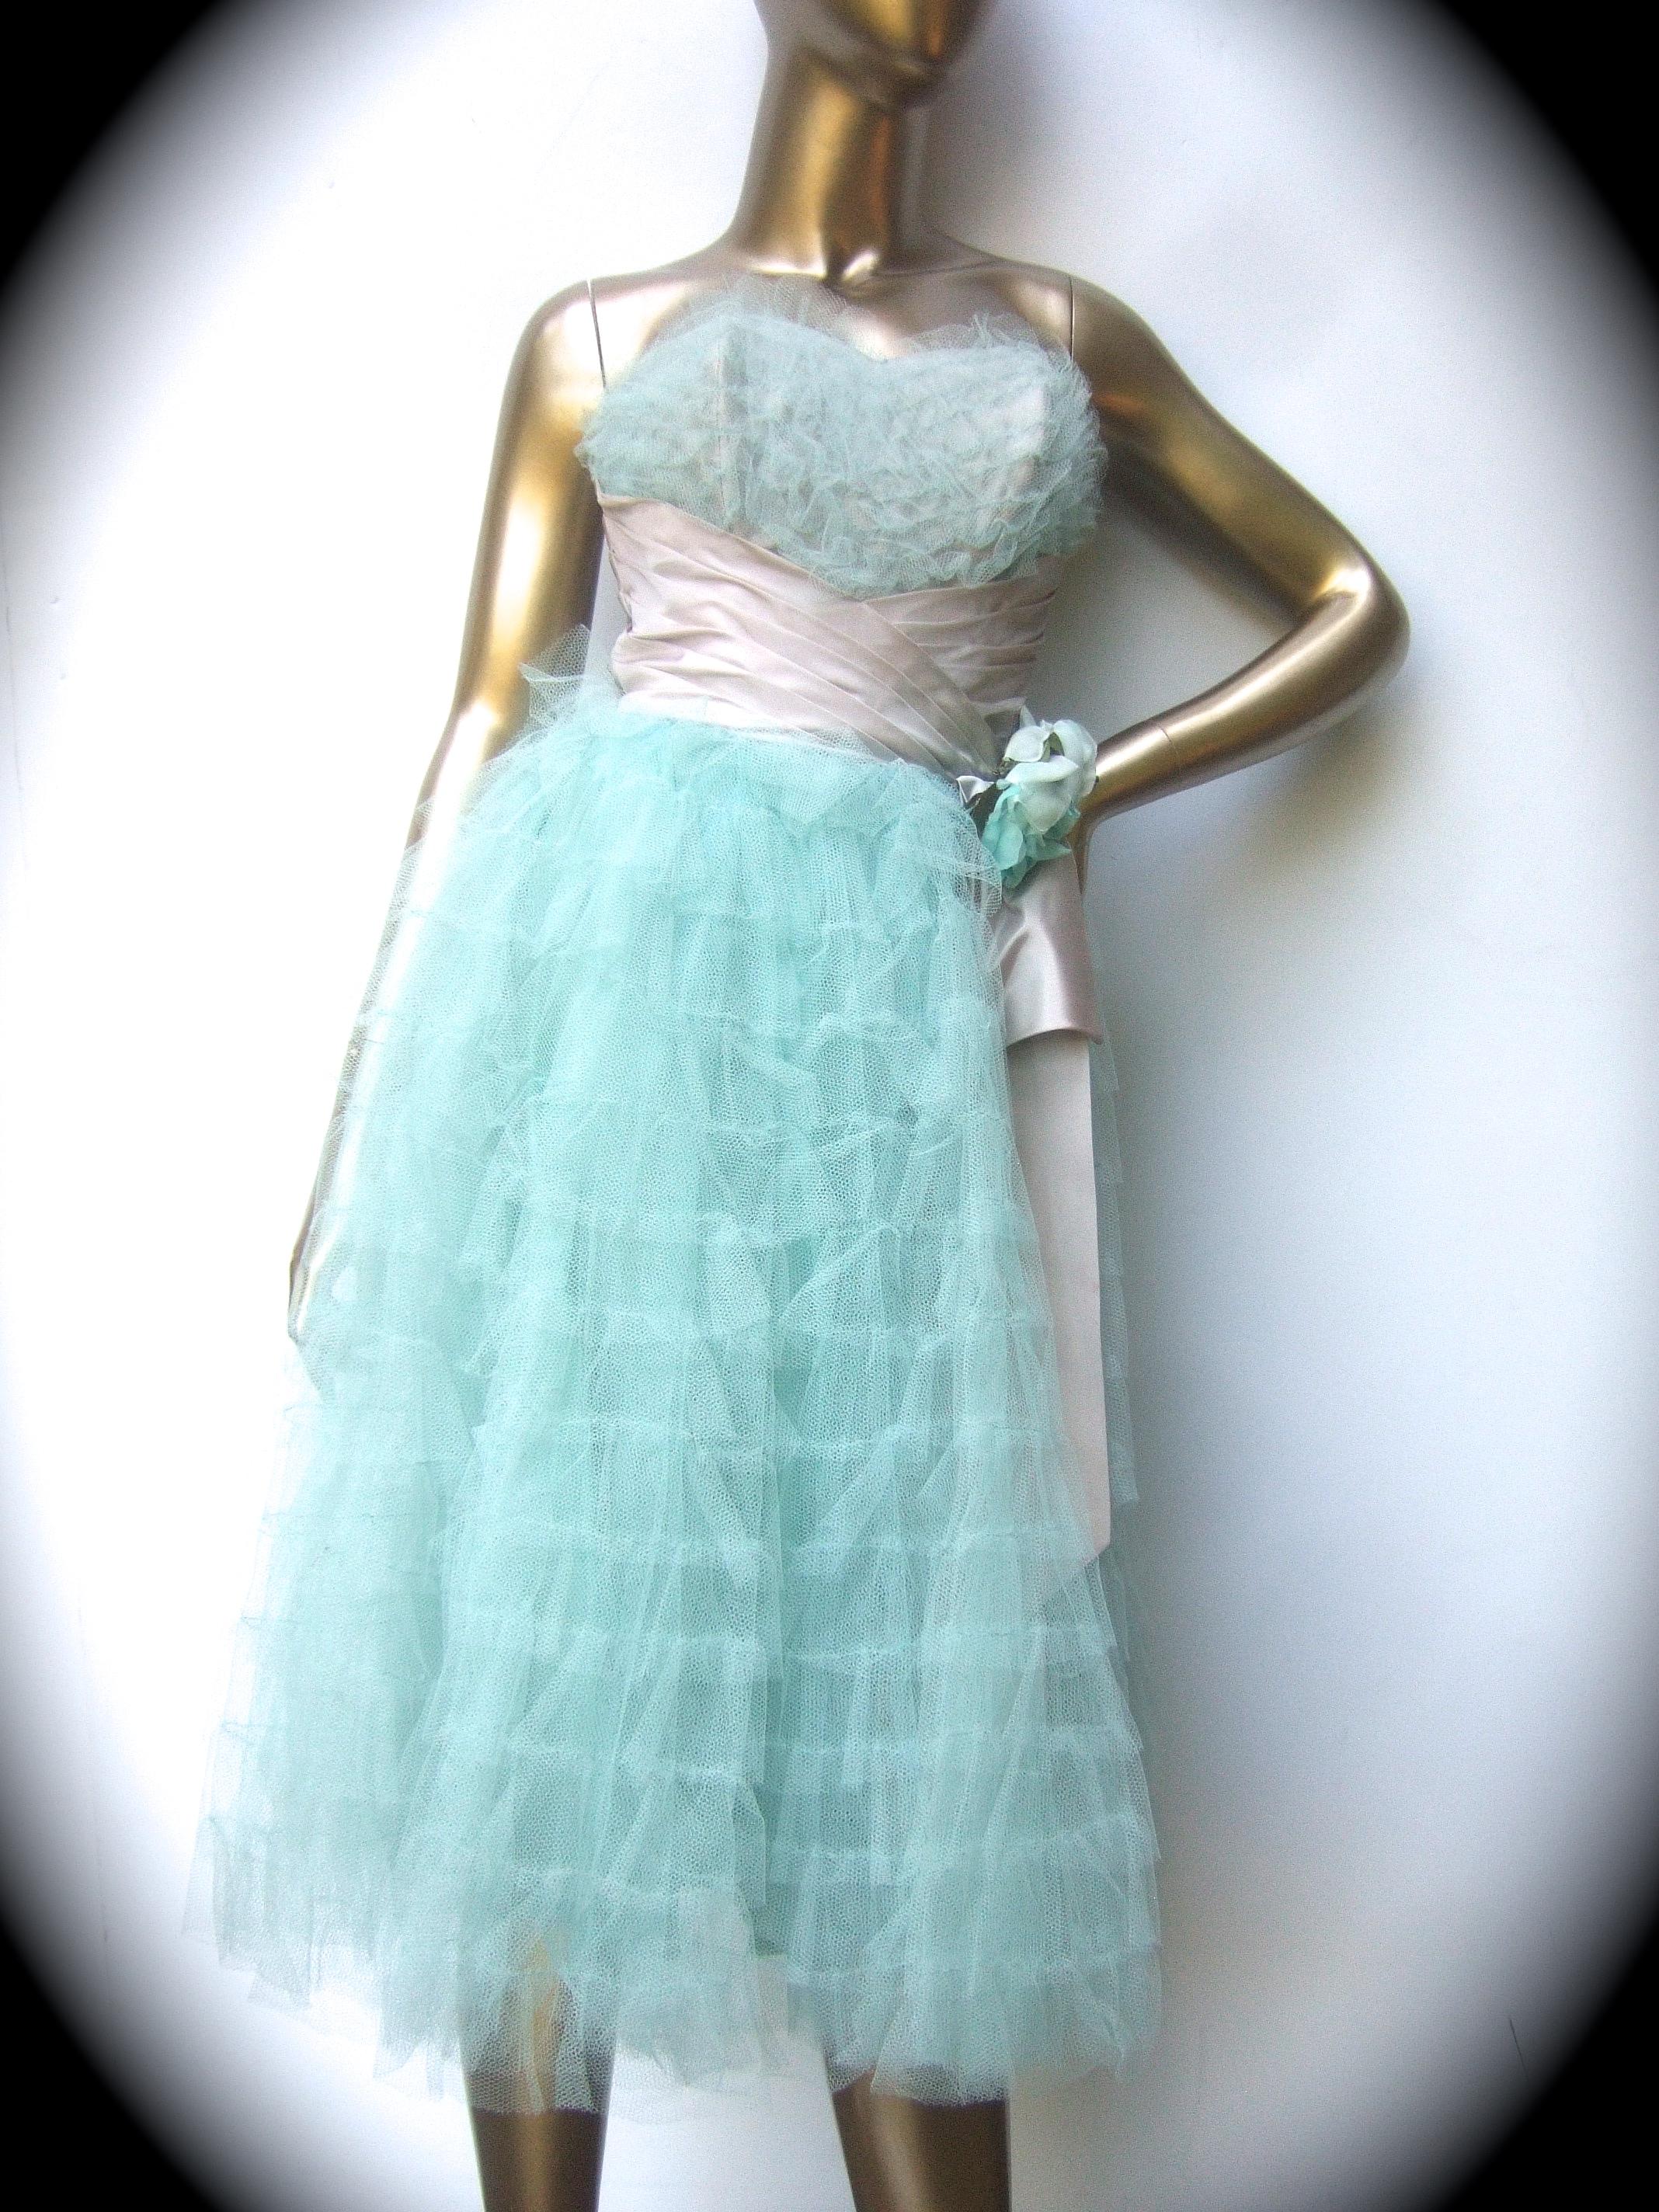 Saks Fifth Avenue Frothy Robin's Egg Pale Blue Tulle Dress c 1950s  1